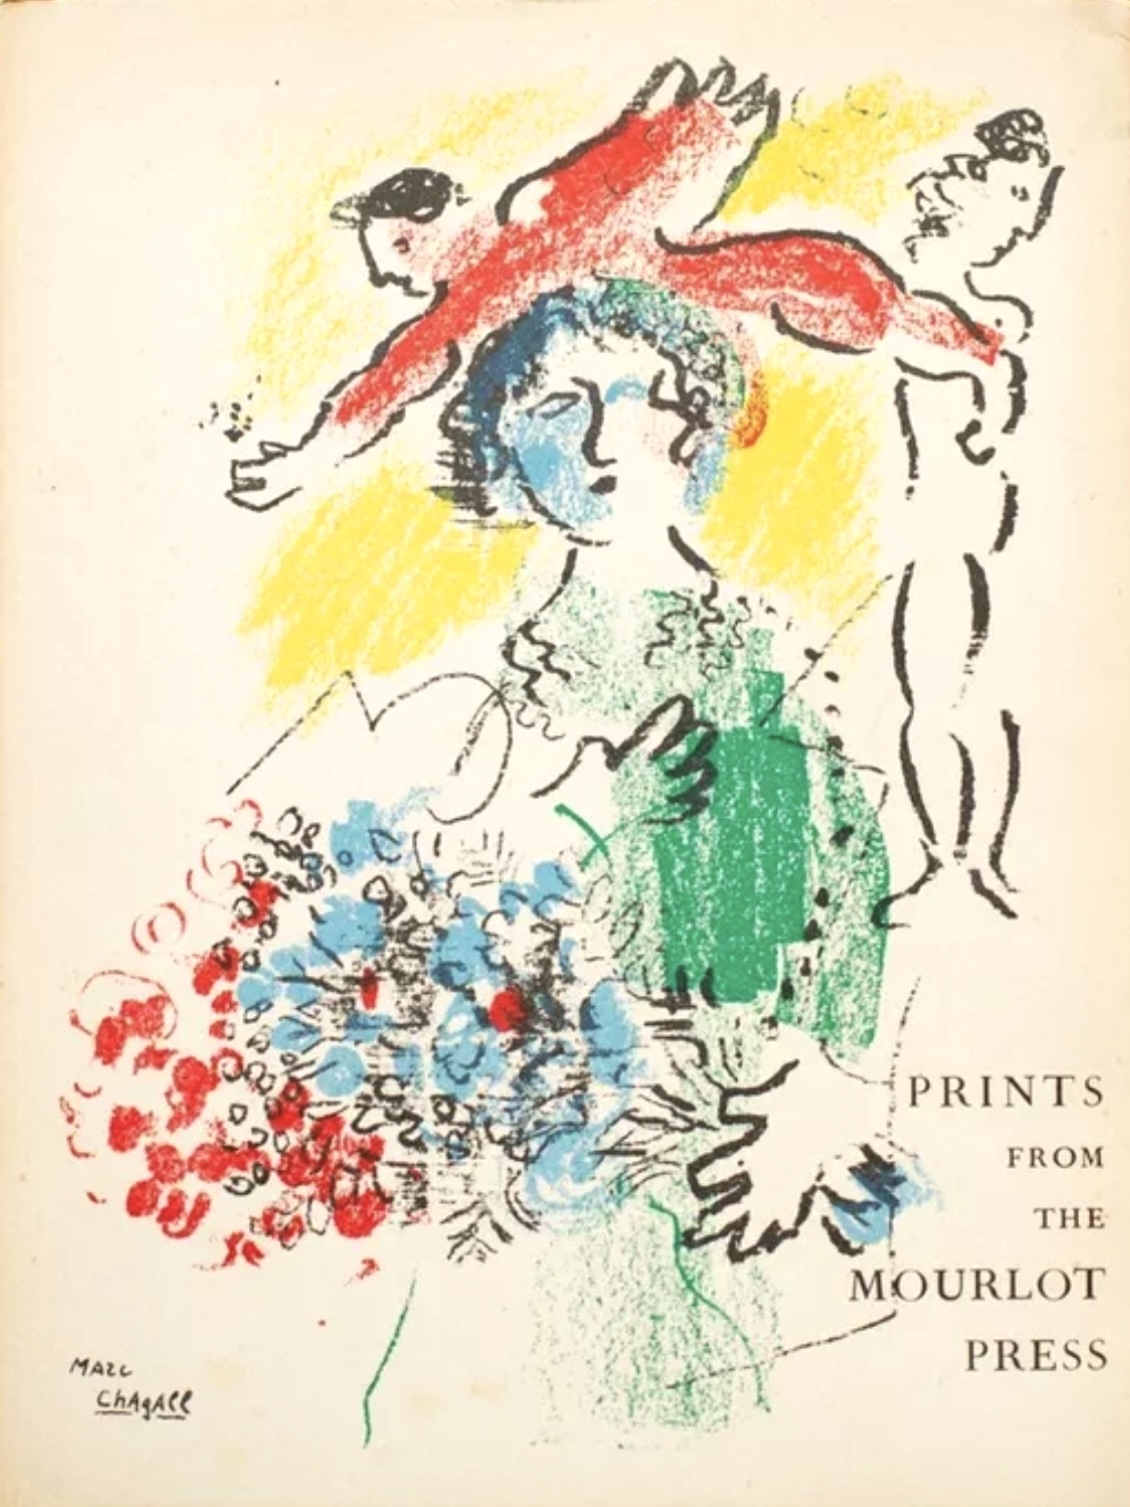 Prints From The Mourlot Press 1964 contains 19 lithographs